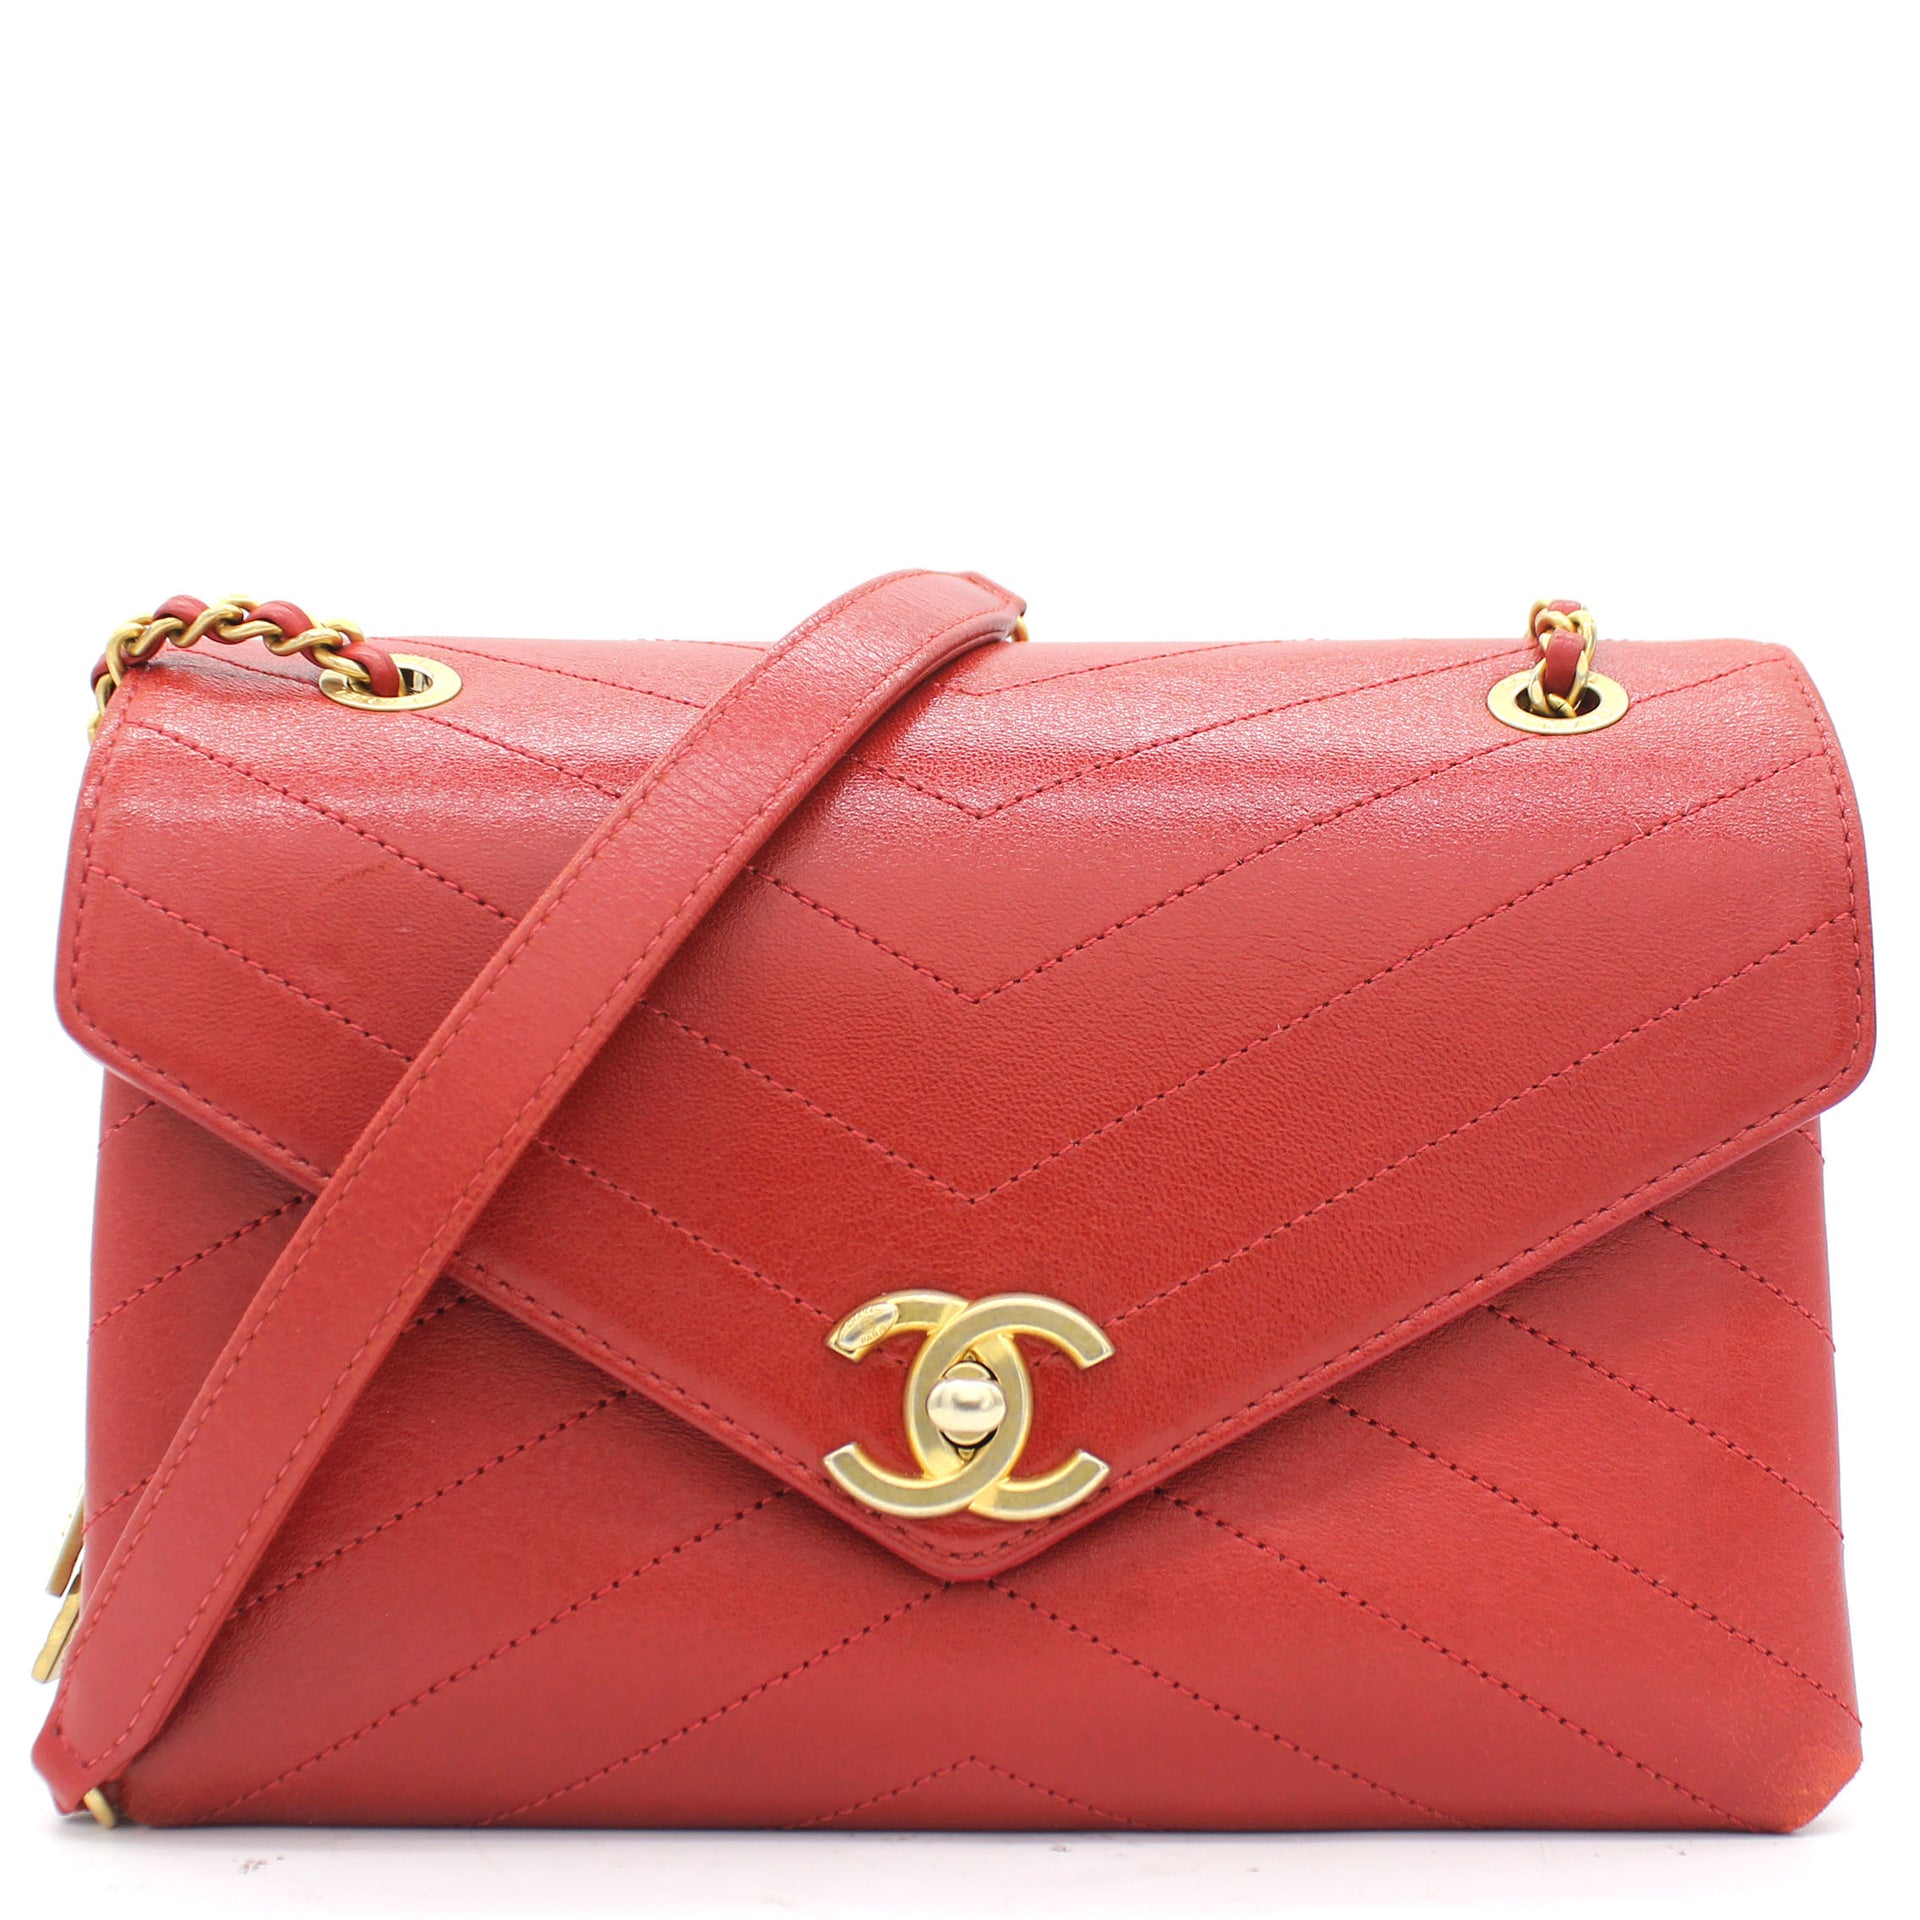 Chanel Calfskin Chevron Stitched Small Coco Flap Bag Red Stylishtop